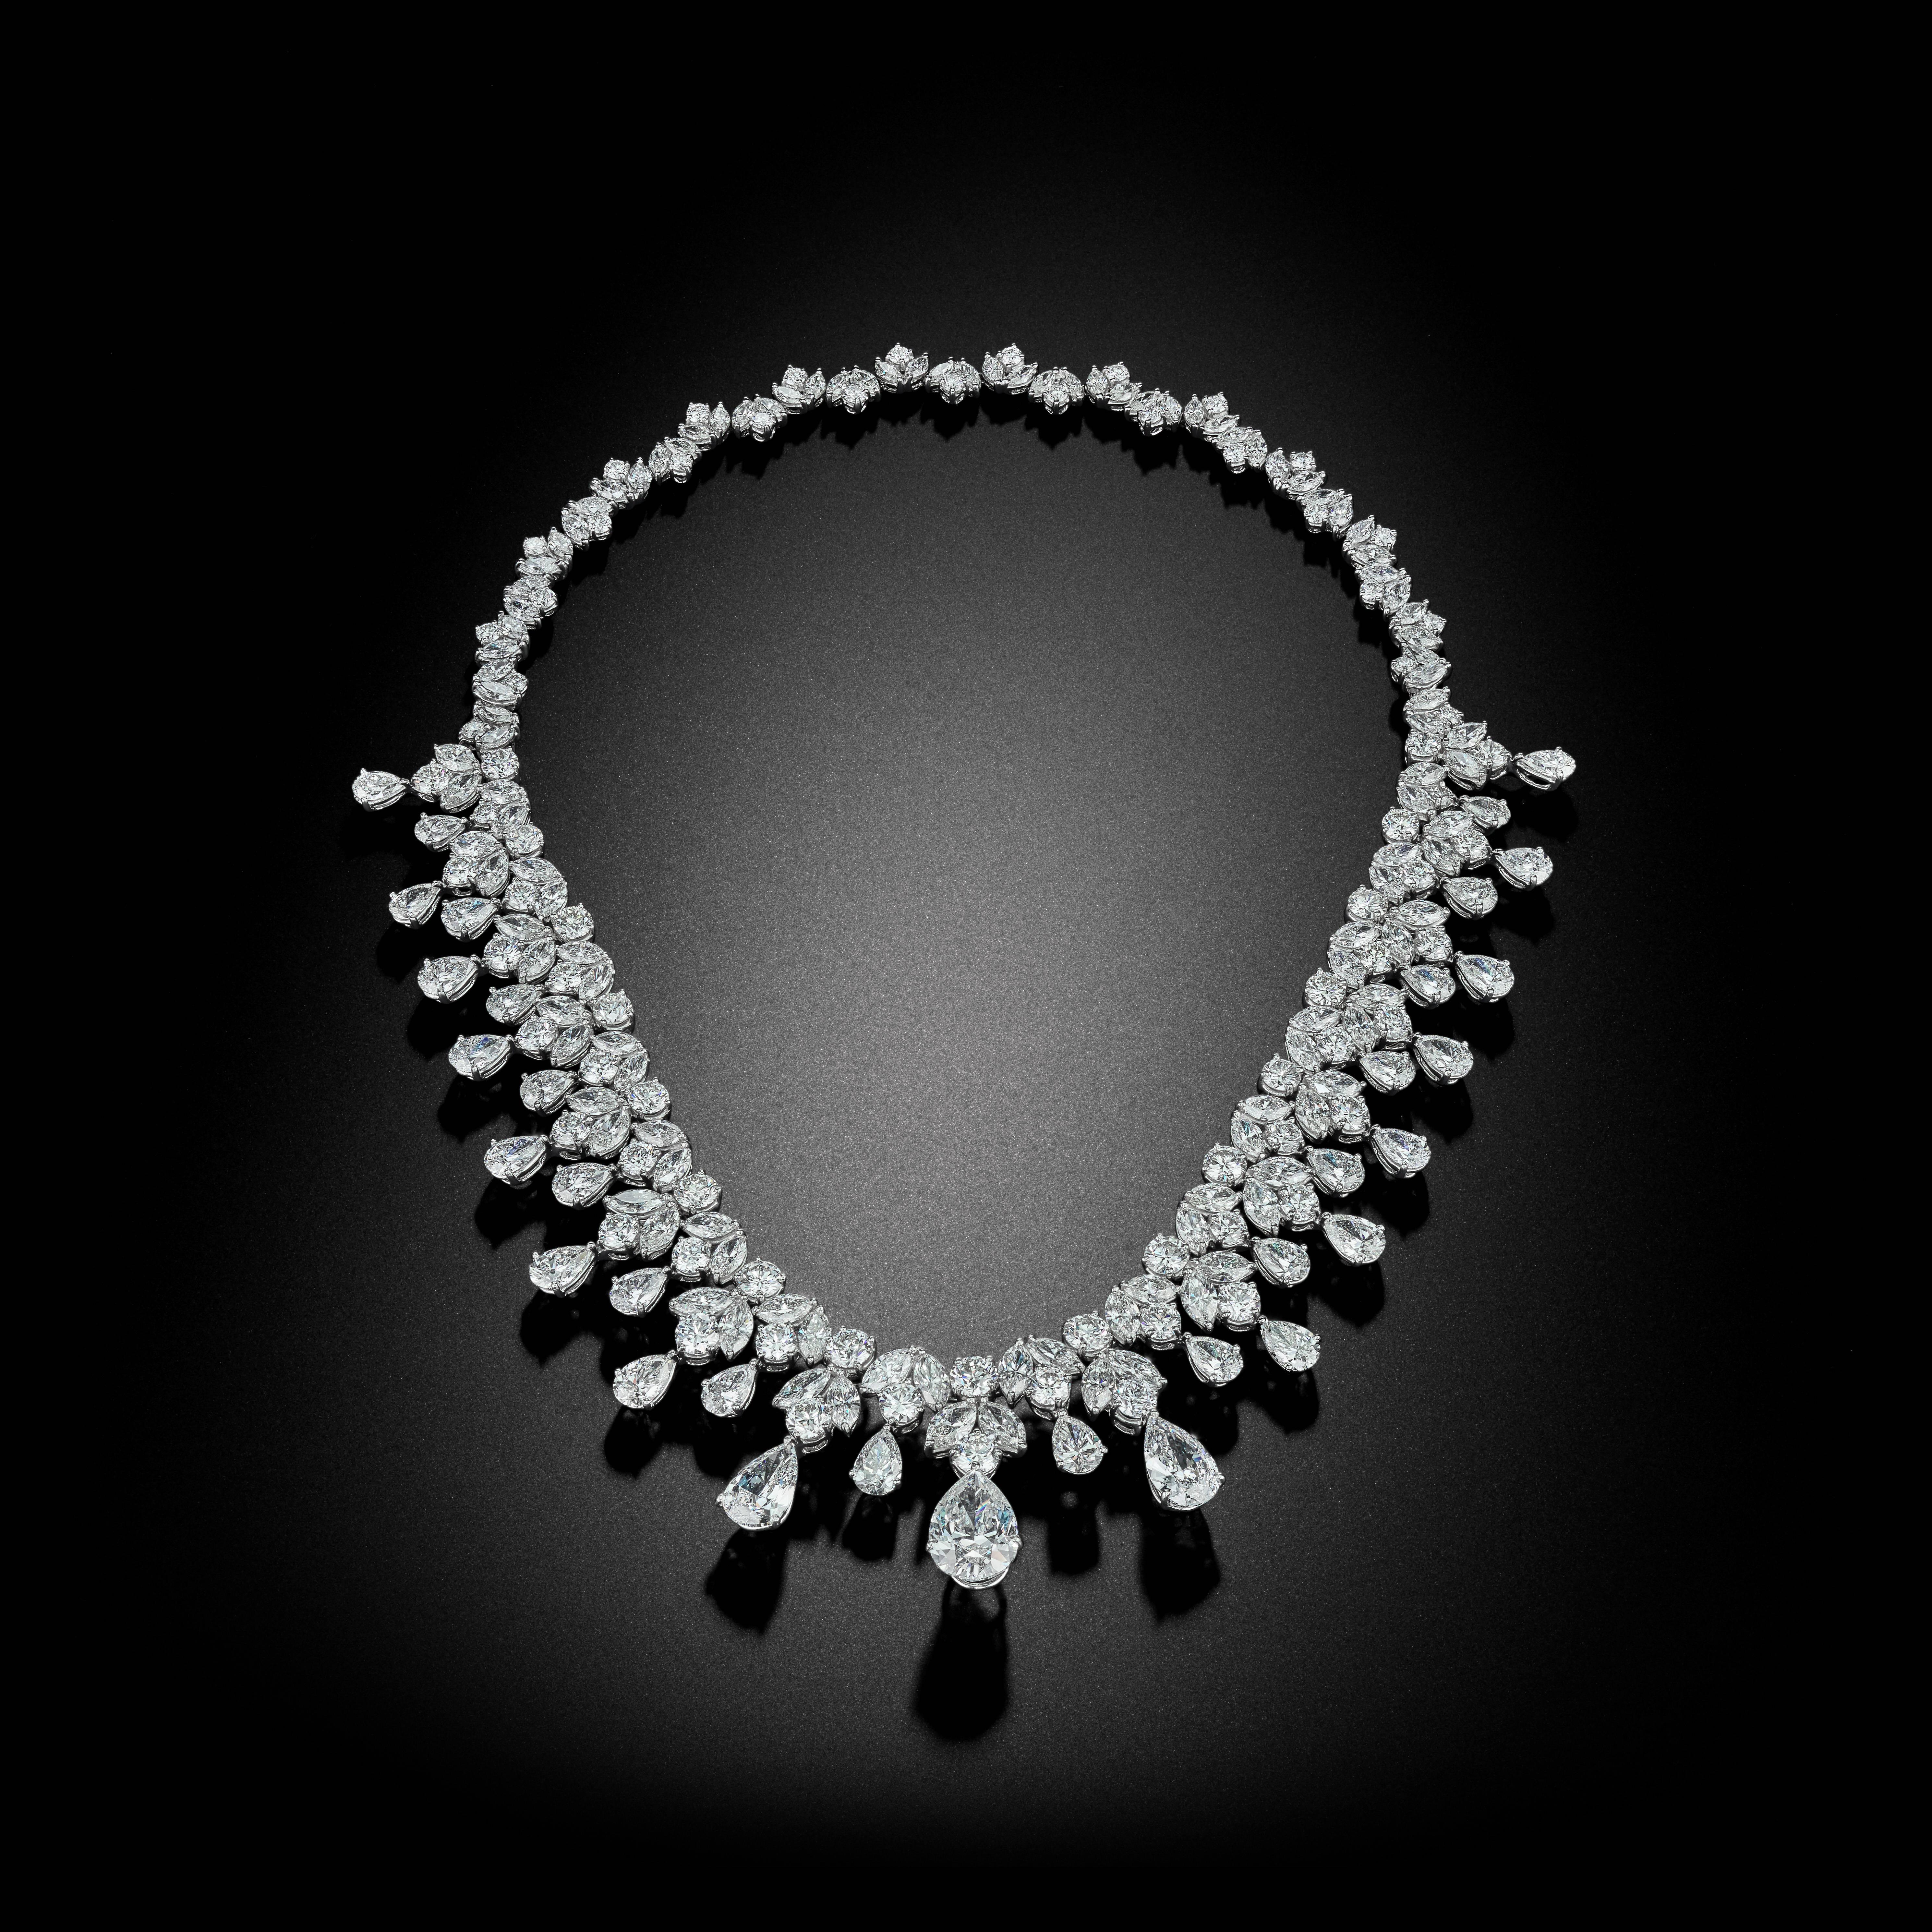 This handmade Platinum Necklace has over 96 Carats of Pear Shape and Brilliant Cut Diamonds. It has the versatility to be worn as either a Necklace or a dazzling Tiara.  Its craftsmanship is beautiful and extremely unique. It will turn anyone who